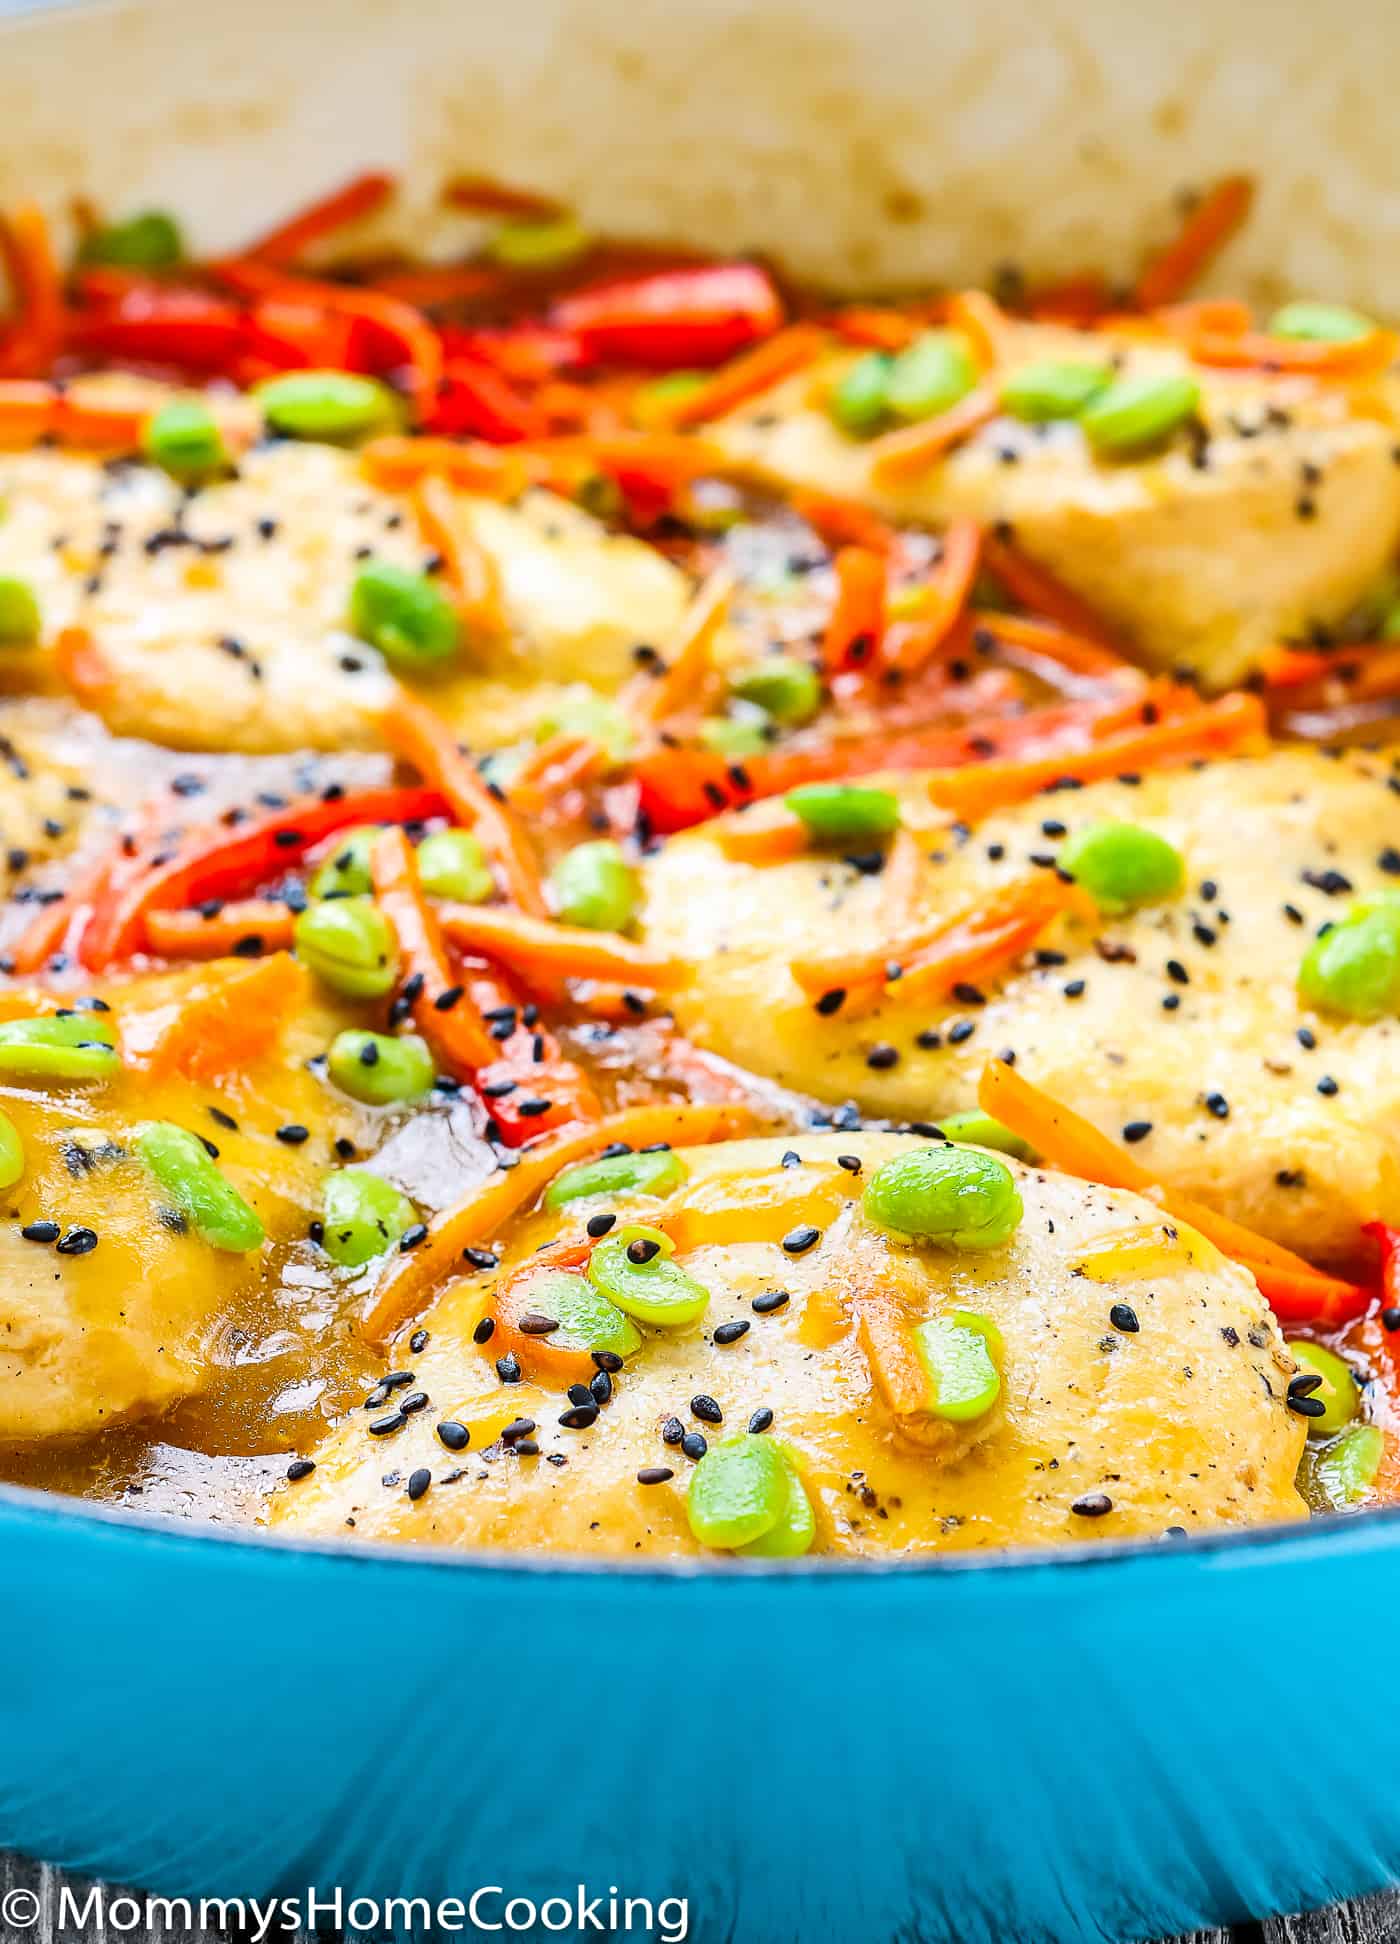 These 30-minute Orange Ginger Chicken Breasts are smothered with a deliciously bright and citrusy orange-ginger sauce. They’re a crowd pleasing hit and a fantastic weeknight meal. https://mommyshomecooking.com